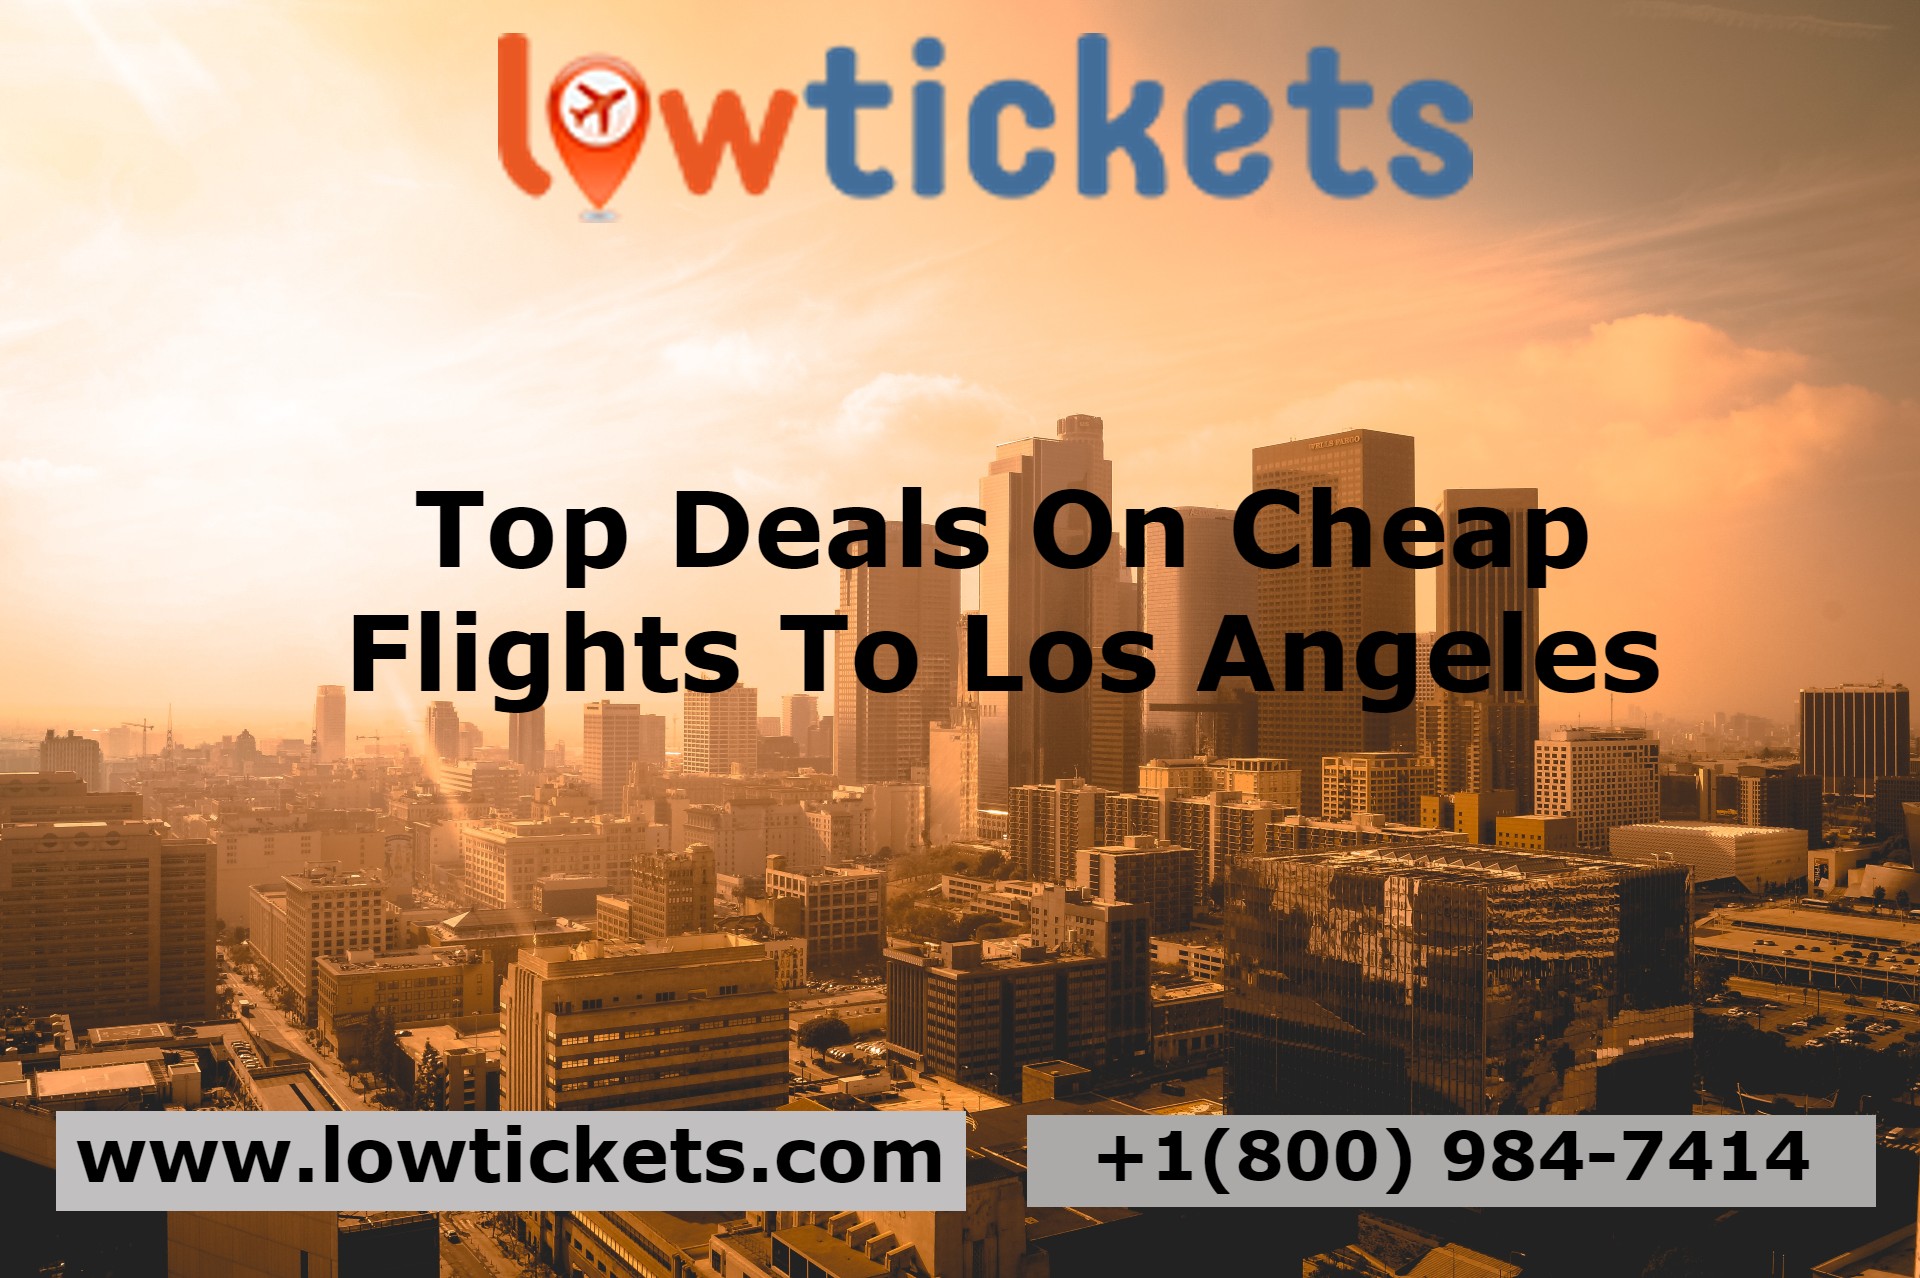 How to get the best deals on cheap flights to Los Angeles?